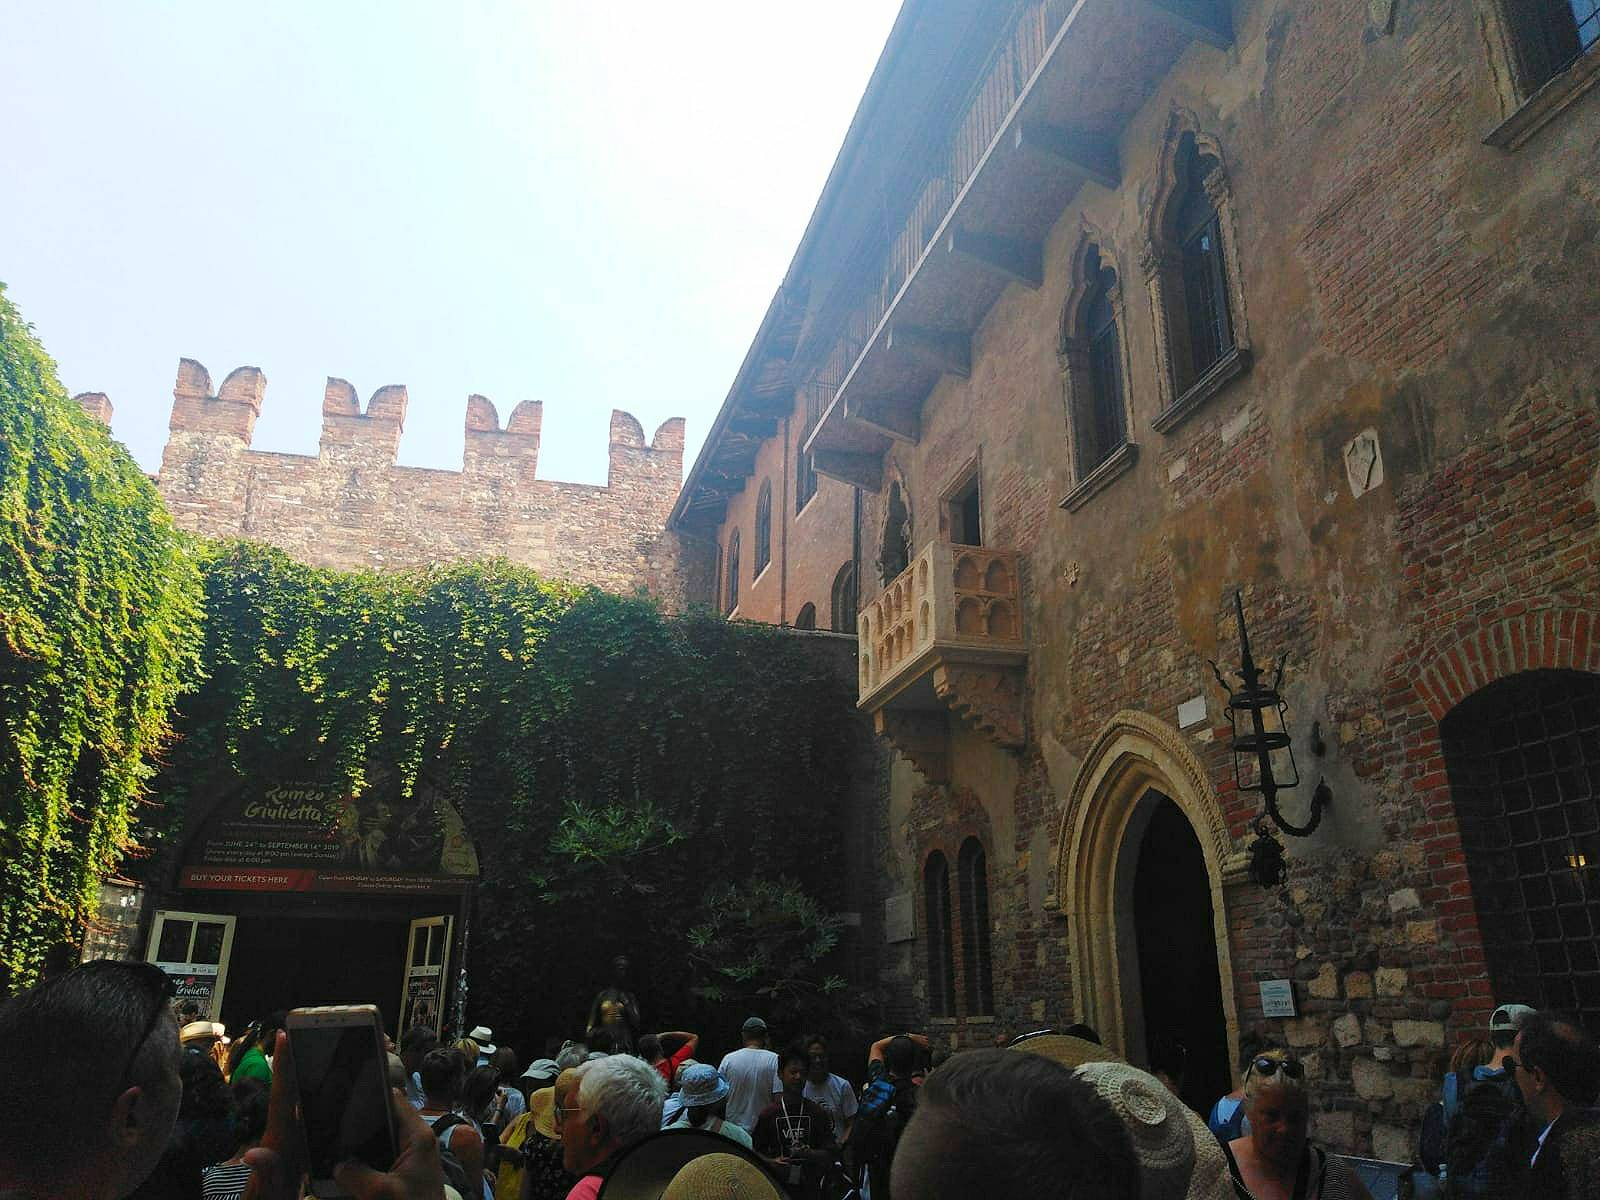 The House of Julietta (Casa di Giulietta), one of the main attractions of Verona with probably the most famous balcony in the world. 